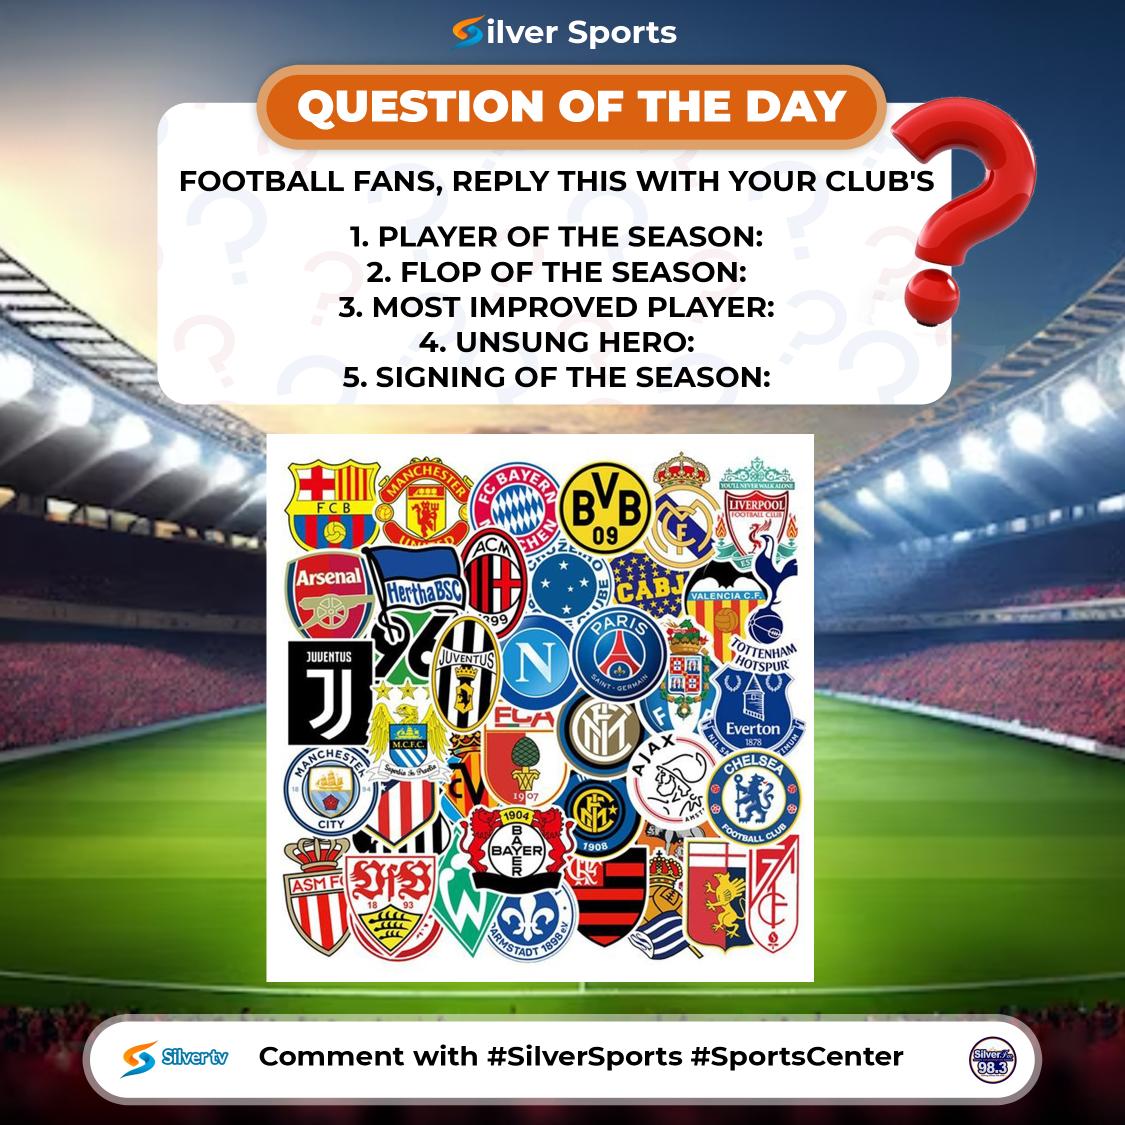 QUESTION OF THE DAY! Football fans, reply this with your club's 🏆 Player of the Season: ❌ Flop of the Season: 💪 Most Improved Player: 👏 Unsung Hero: 👕 Signing of the Season: Reply with #SportsCenter for validation